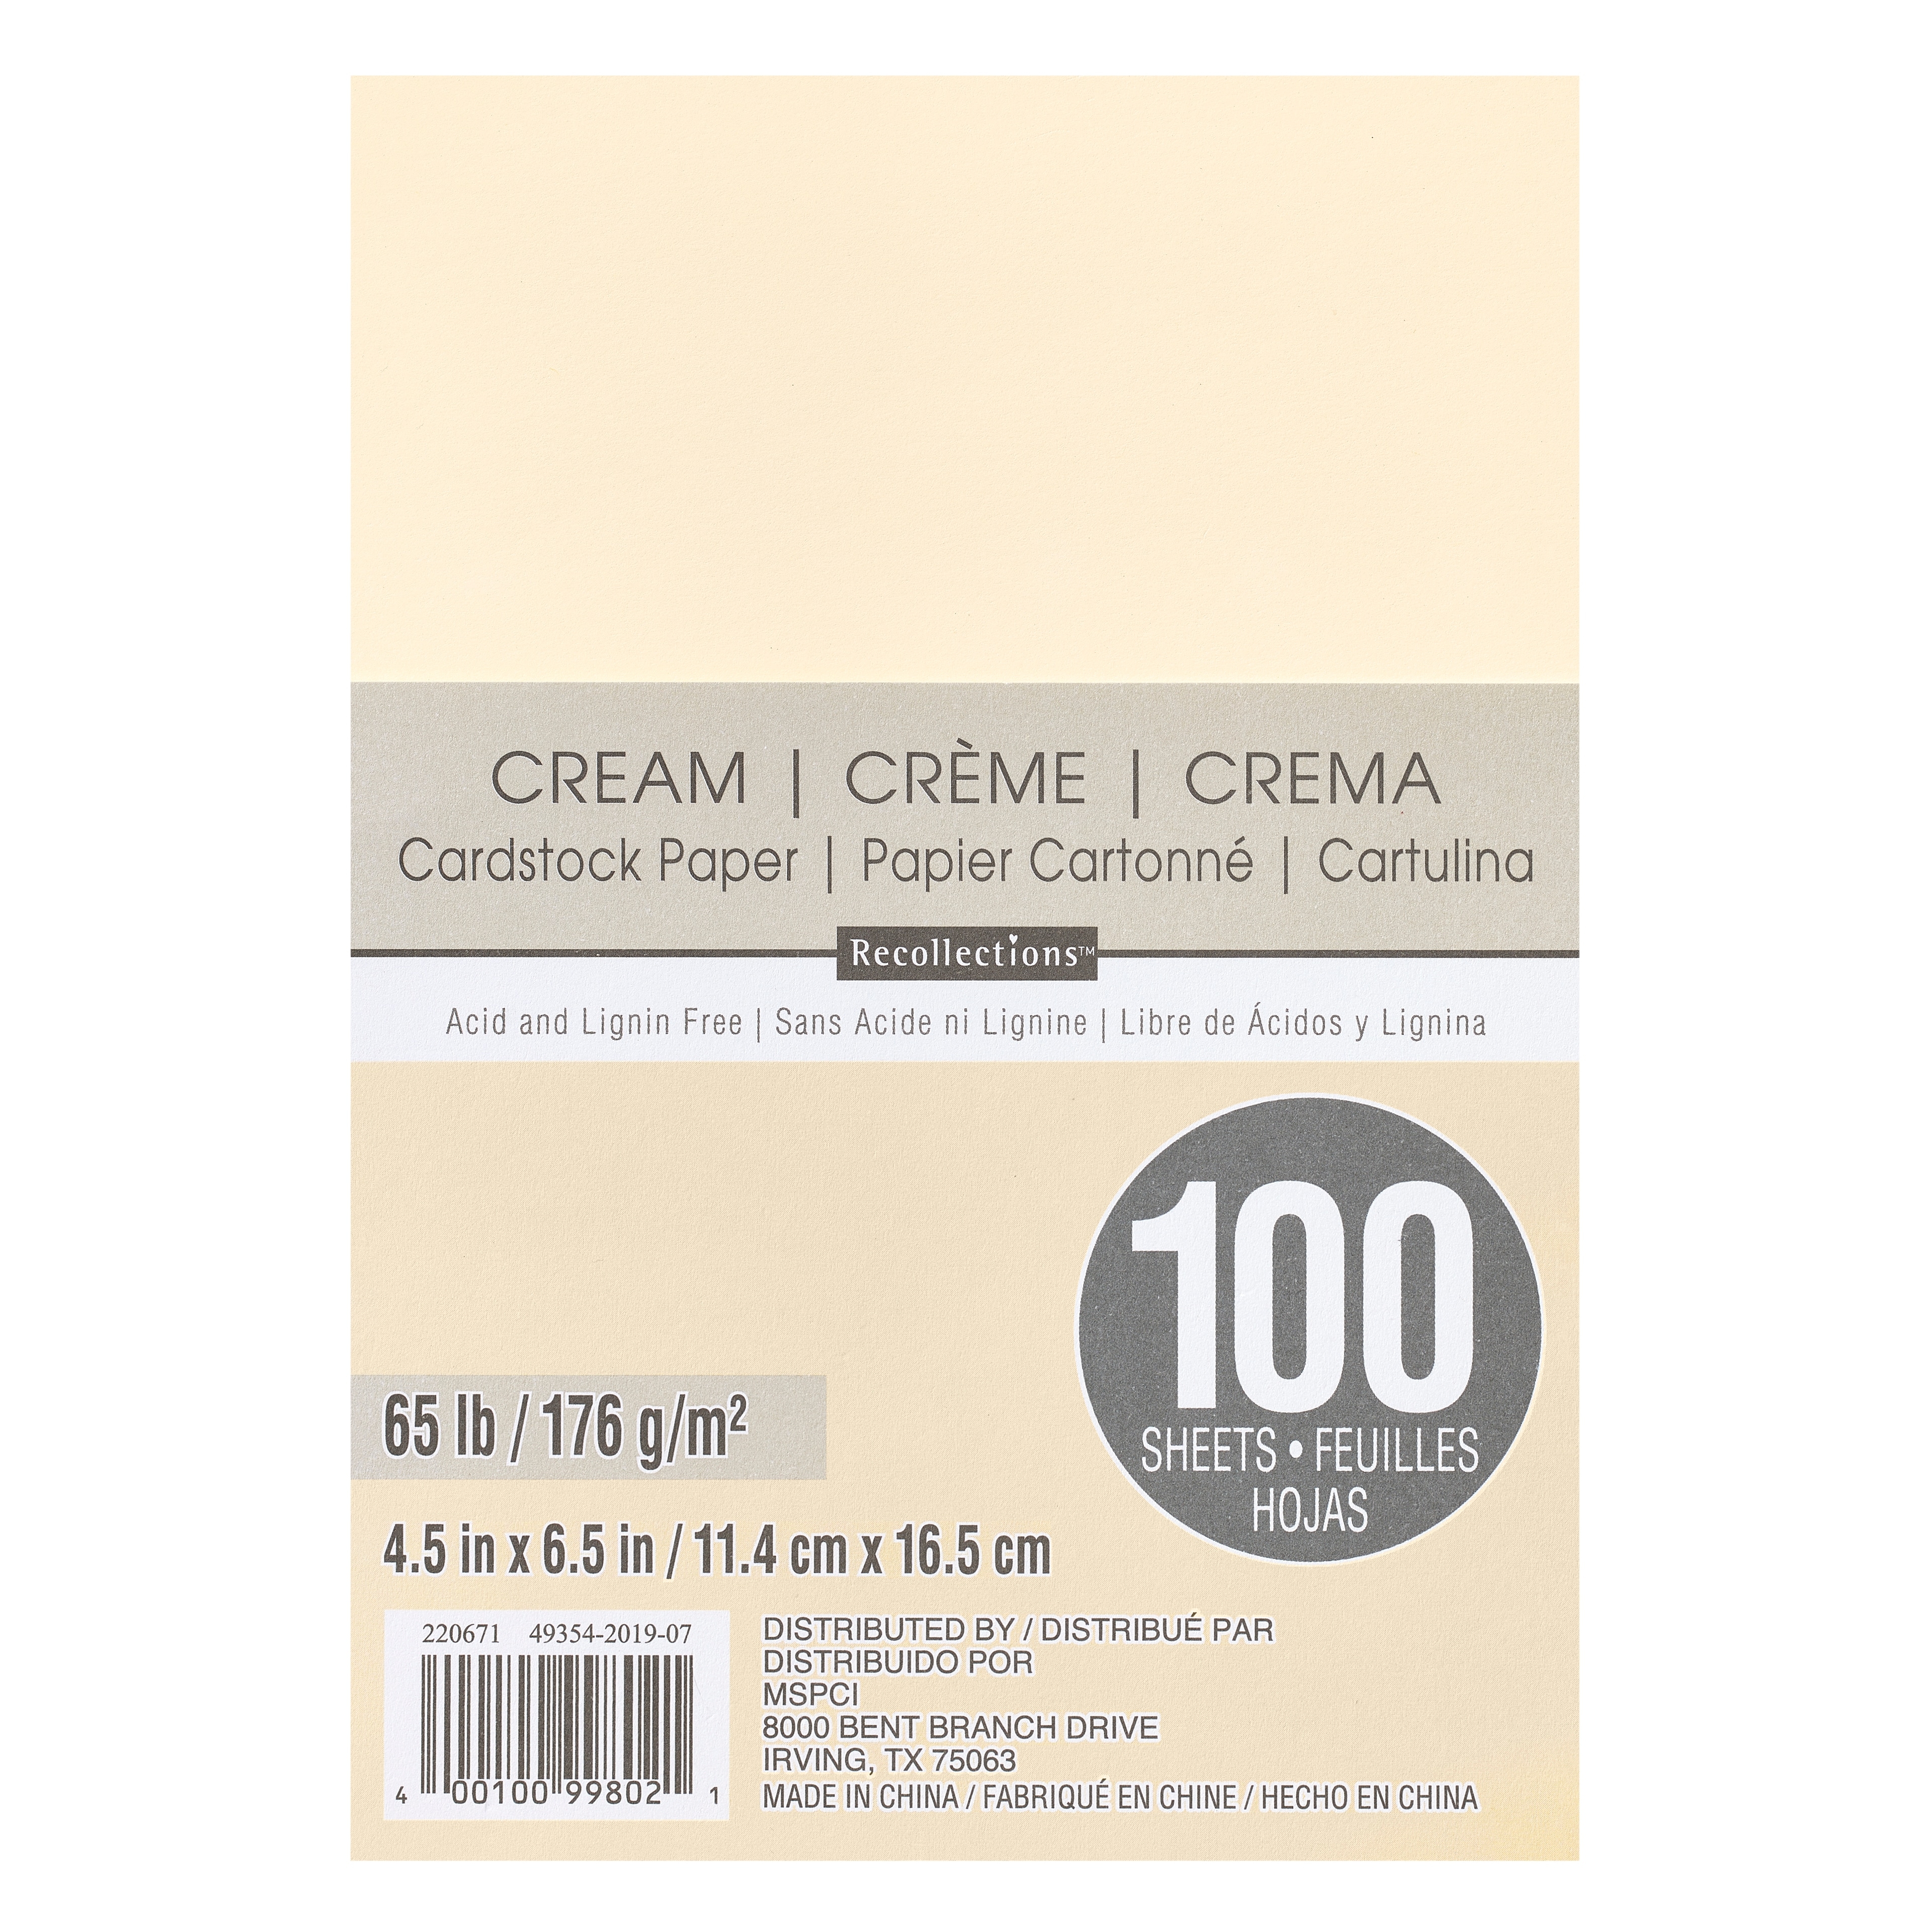 RECOLLECTIONS CARDSTOCK Paper 8 1/2 x 11 50 Sheets 65 lb SOLID WHITE DOVE